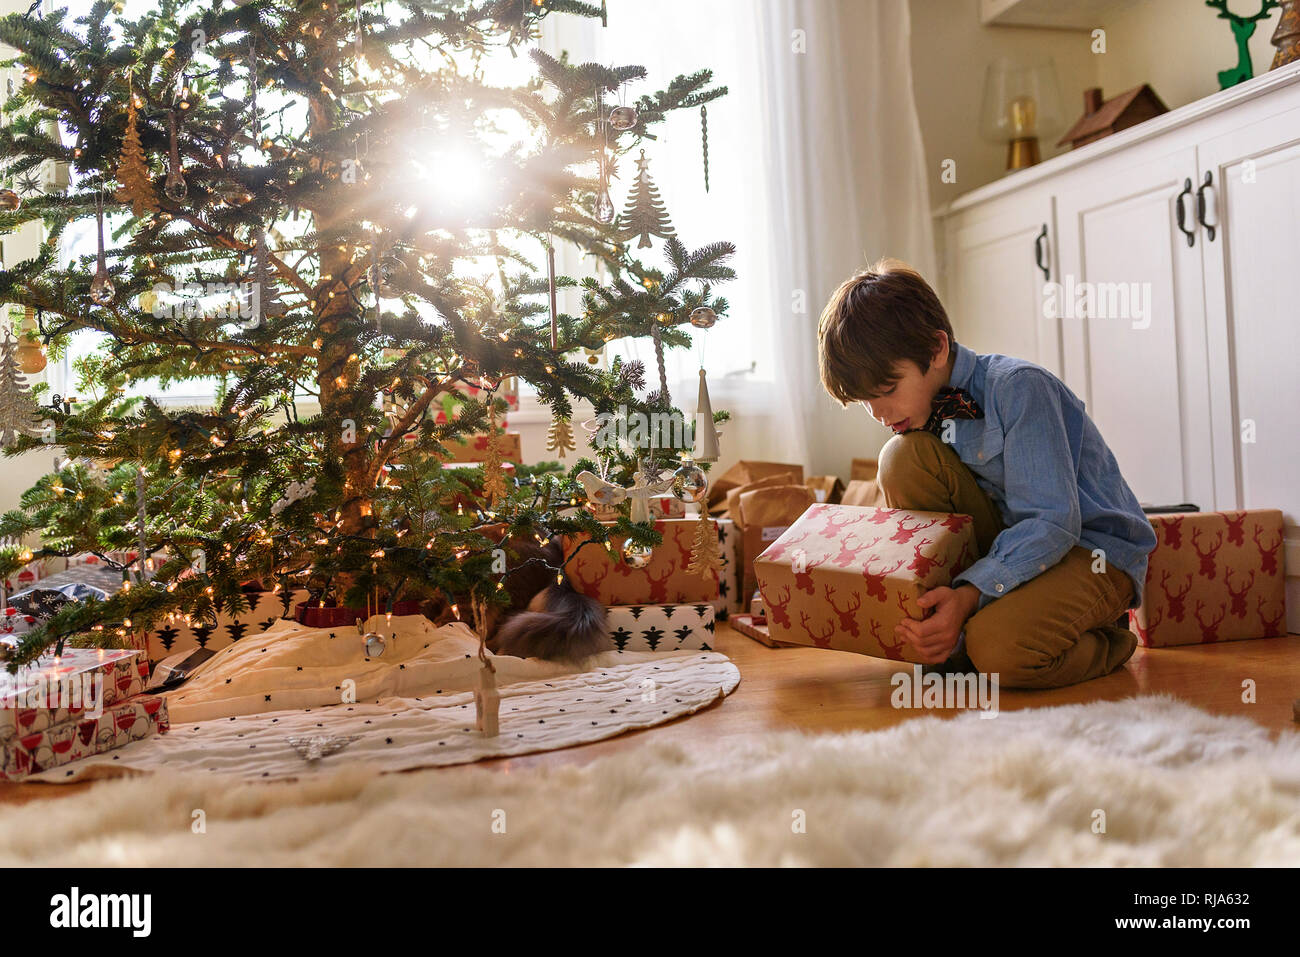 Boy kneeling in front of a Christmas tree looking at gifts Stock Photo